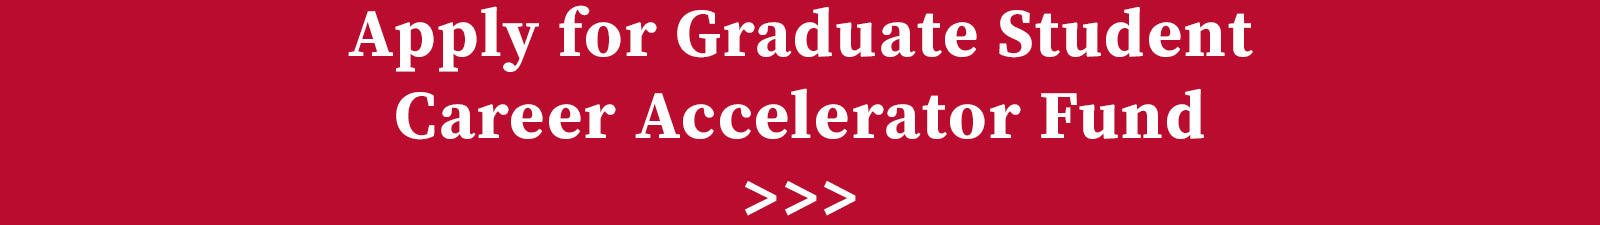 Apply For Graduate Student Career Accelerator Fund Here